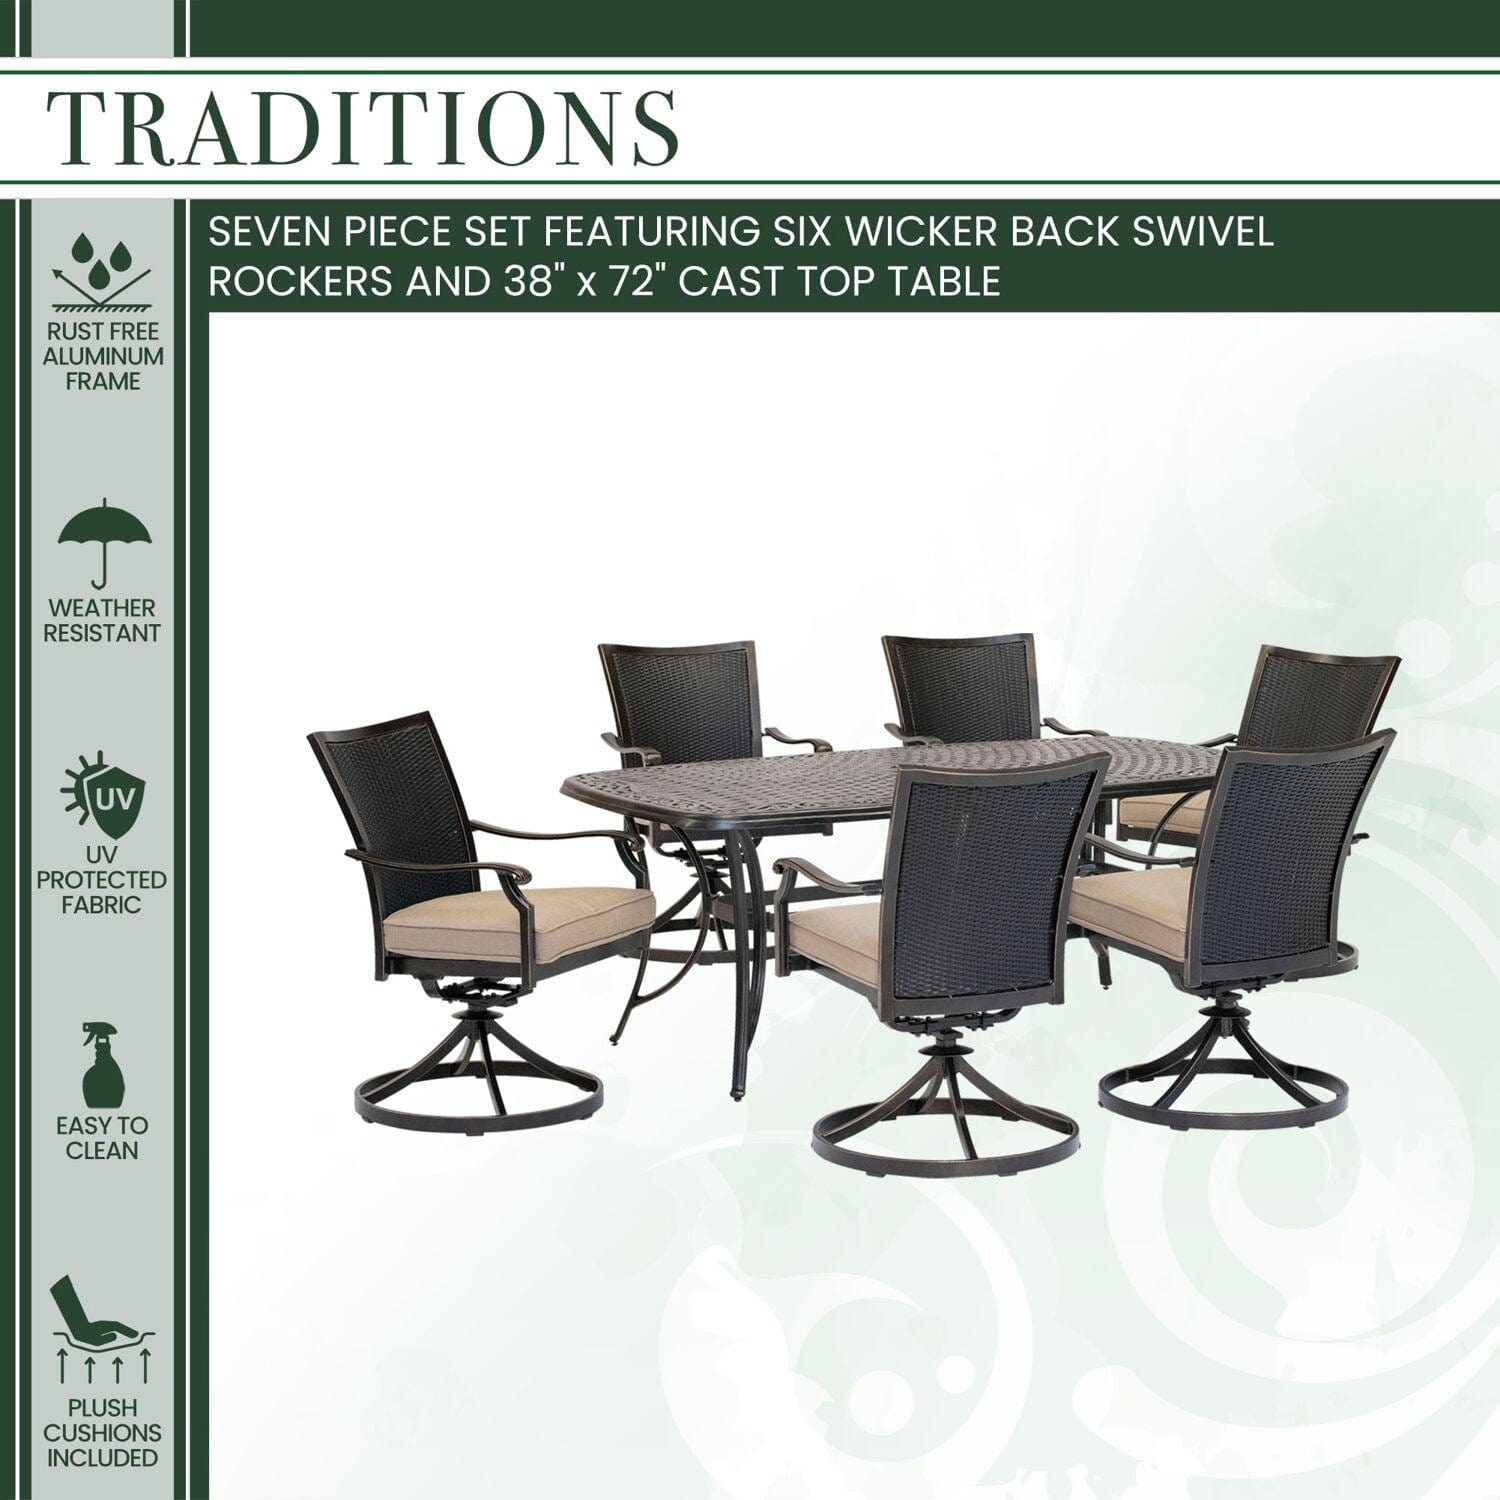 Hanover Outdoor Dining Set Hanover - Traditions 7-Piece Dining Set in Tan with 6 Wicker Back Swivel Rockers and Large 38 in. x 72 in. Cast-Top Table - TRADDNWB7PCSWC-TAN